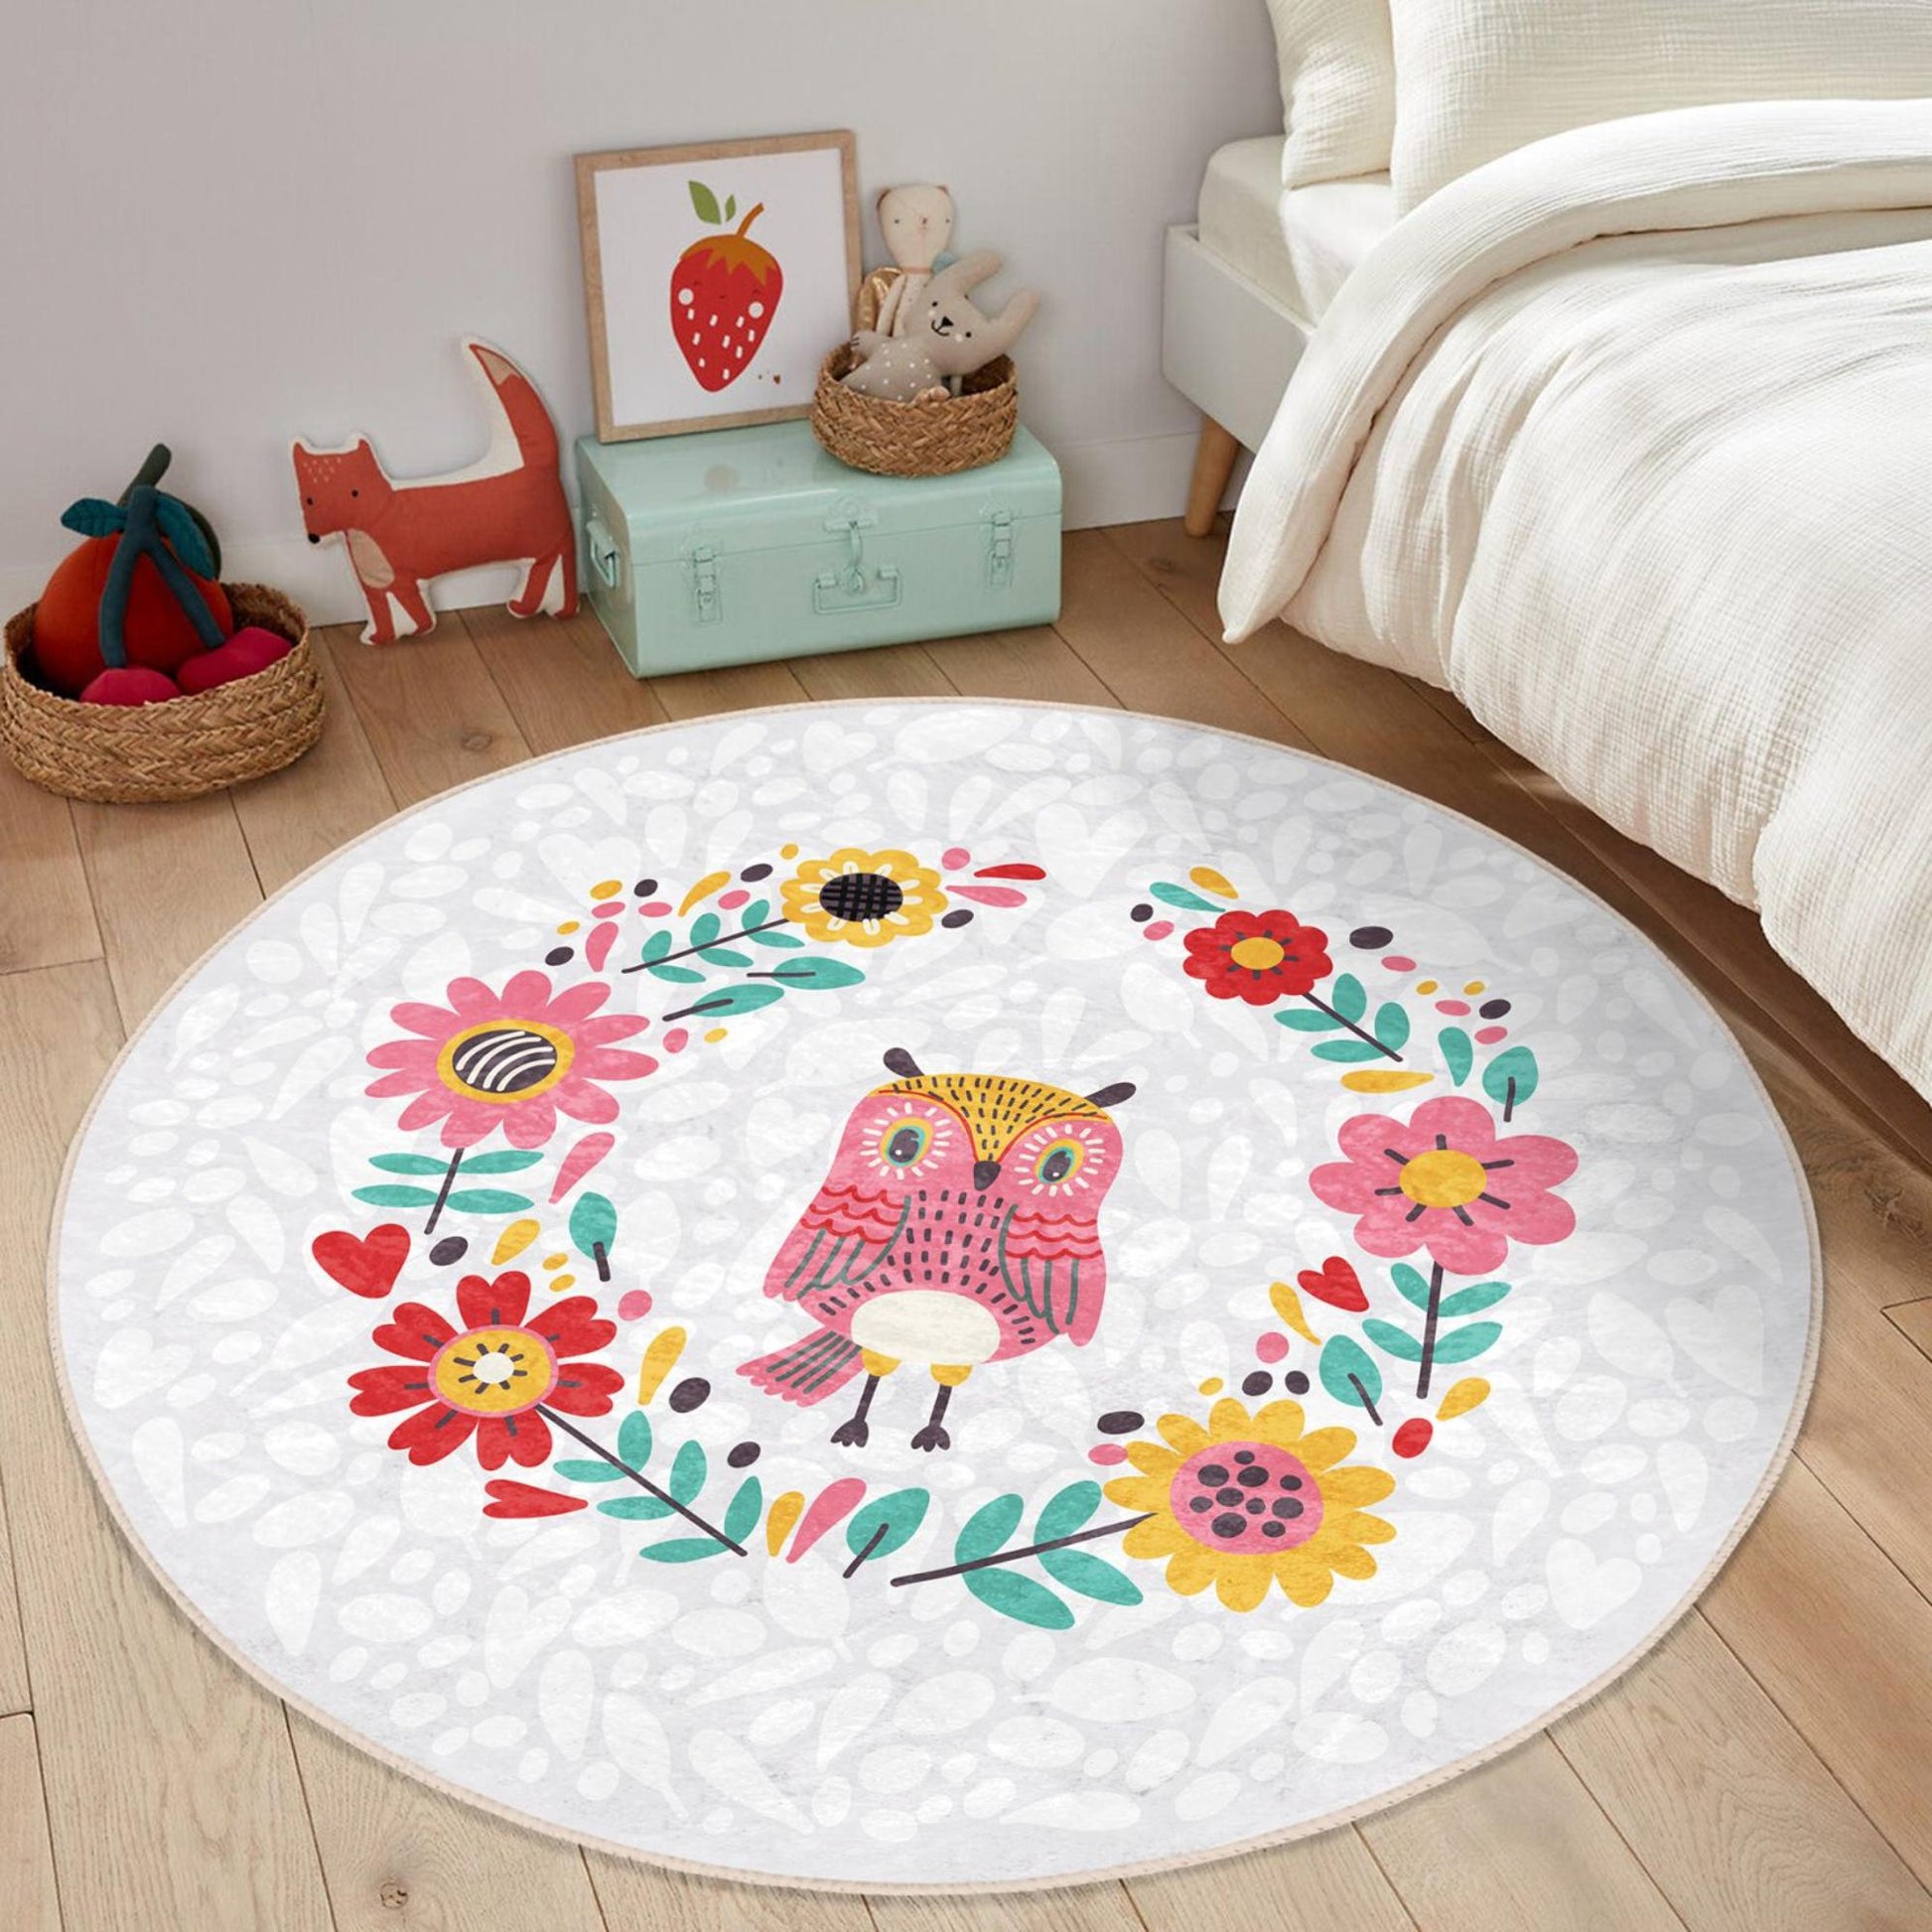 Sweet floral-themed rug perfect for adding charm to kids' spaces.